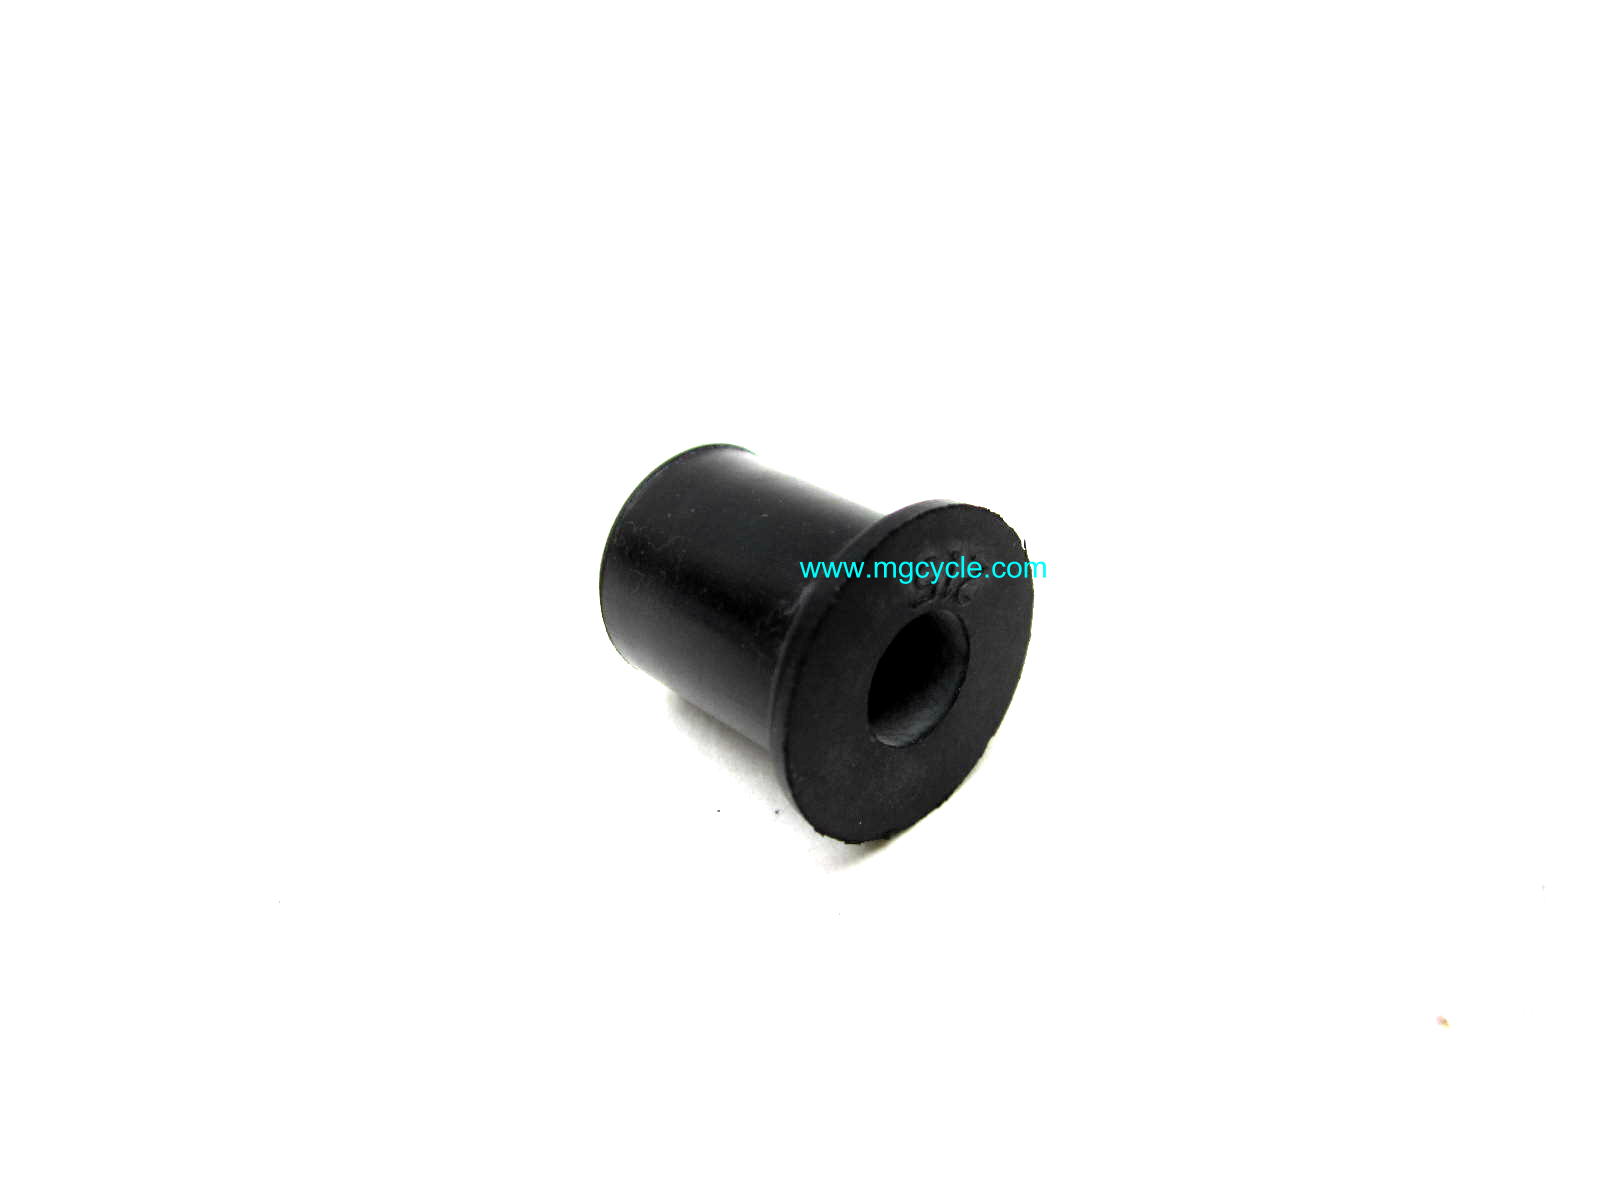 Rubber isolator well nut, body panels, frame rail covers - Click Image to Close